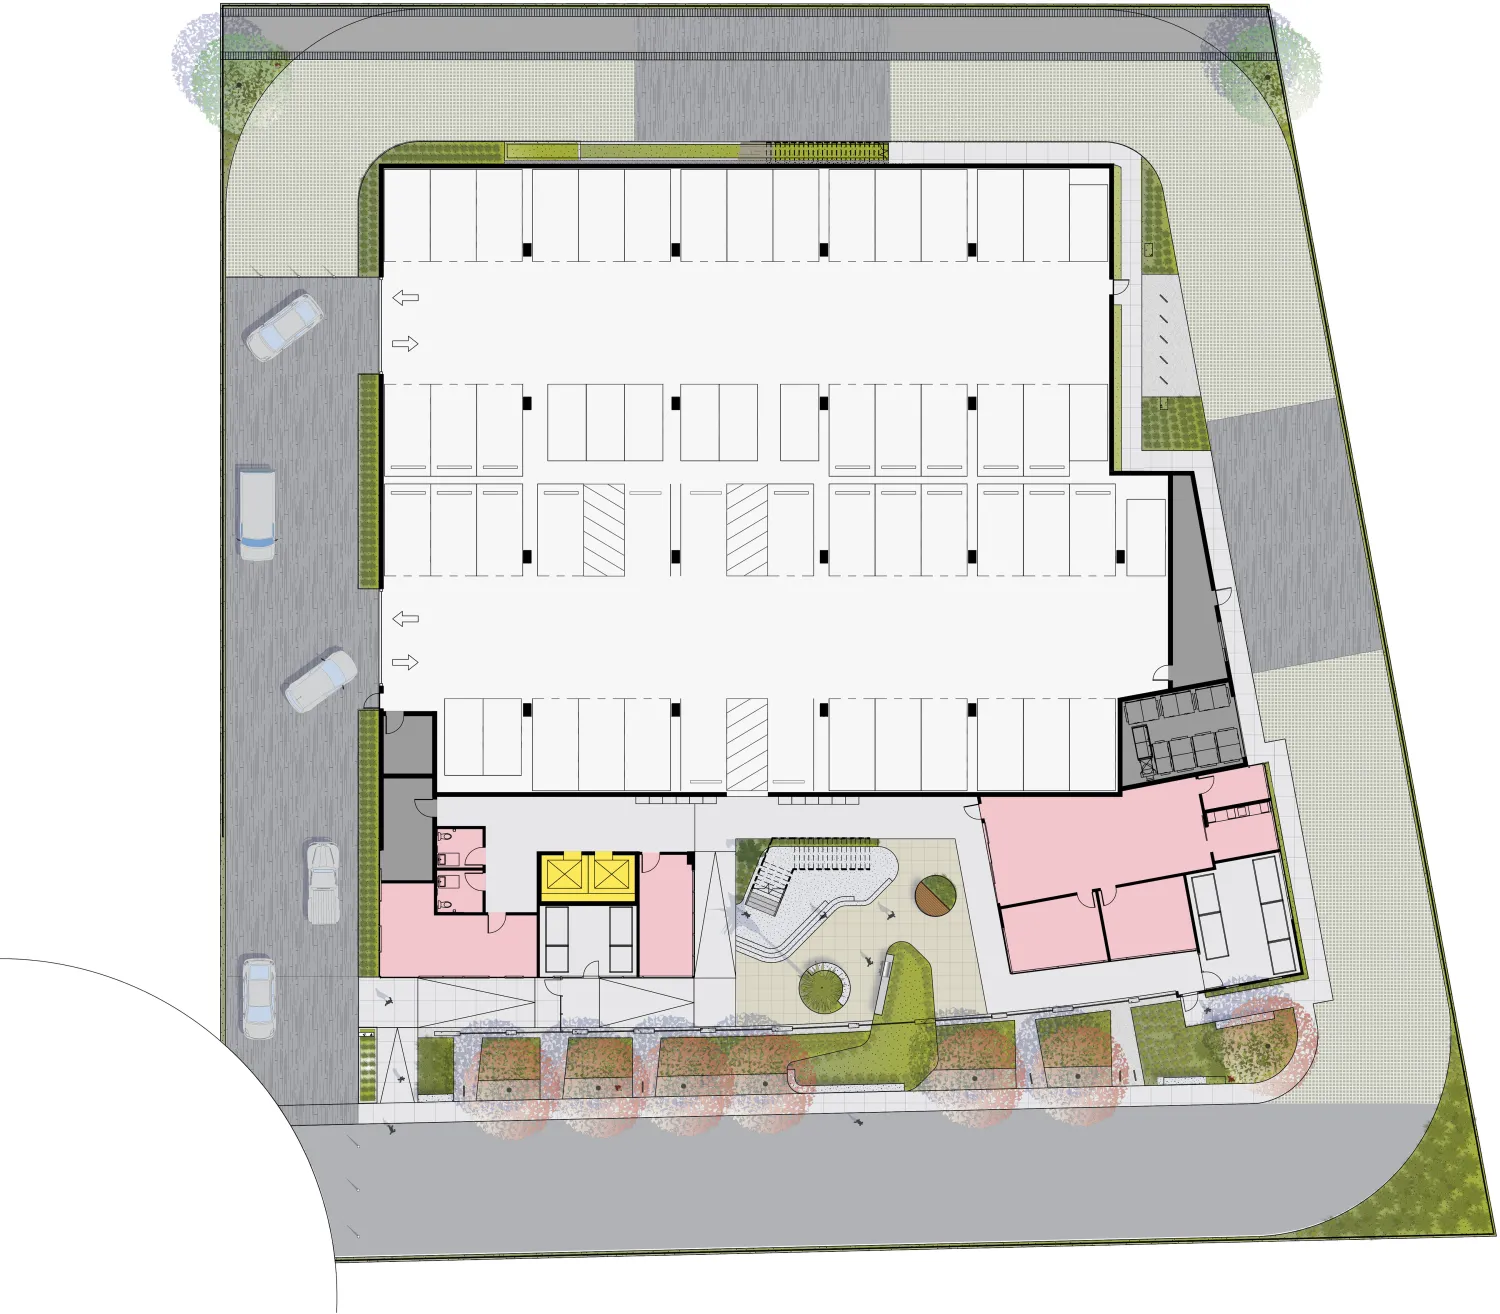 Level one site plan for 355 Sango Court in Milpitas, Ca.